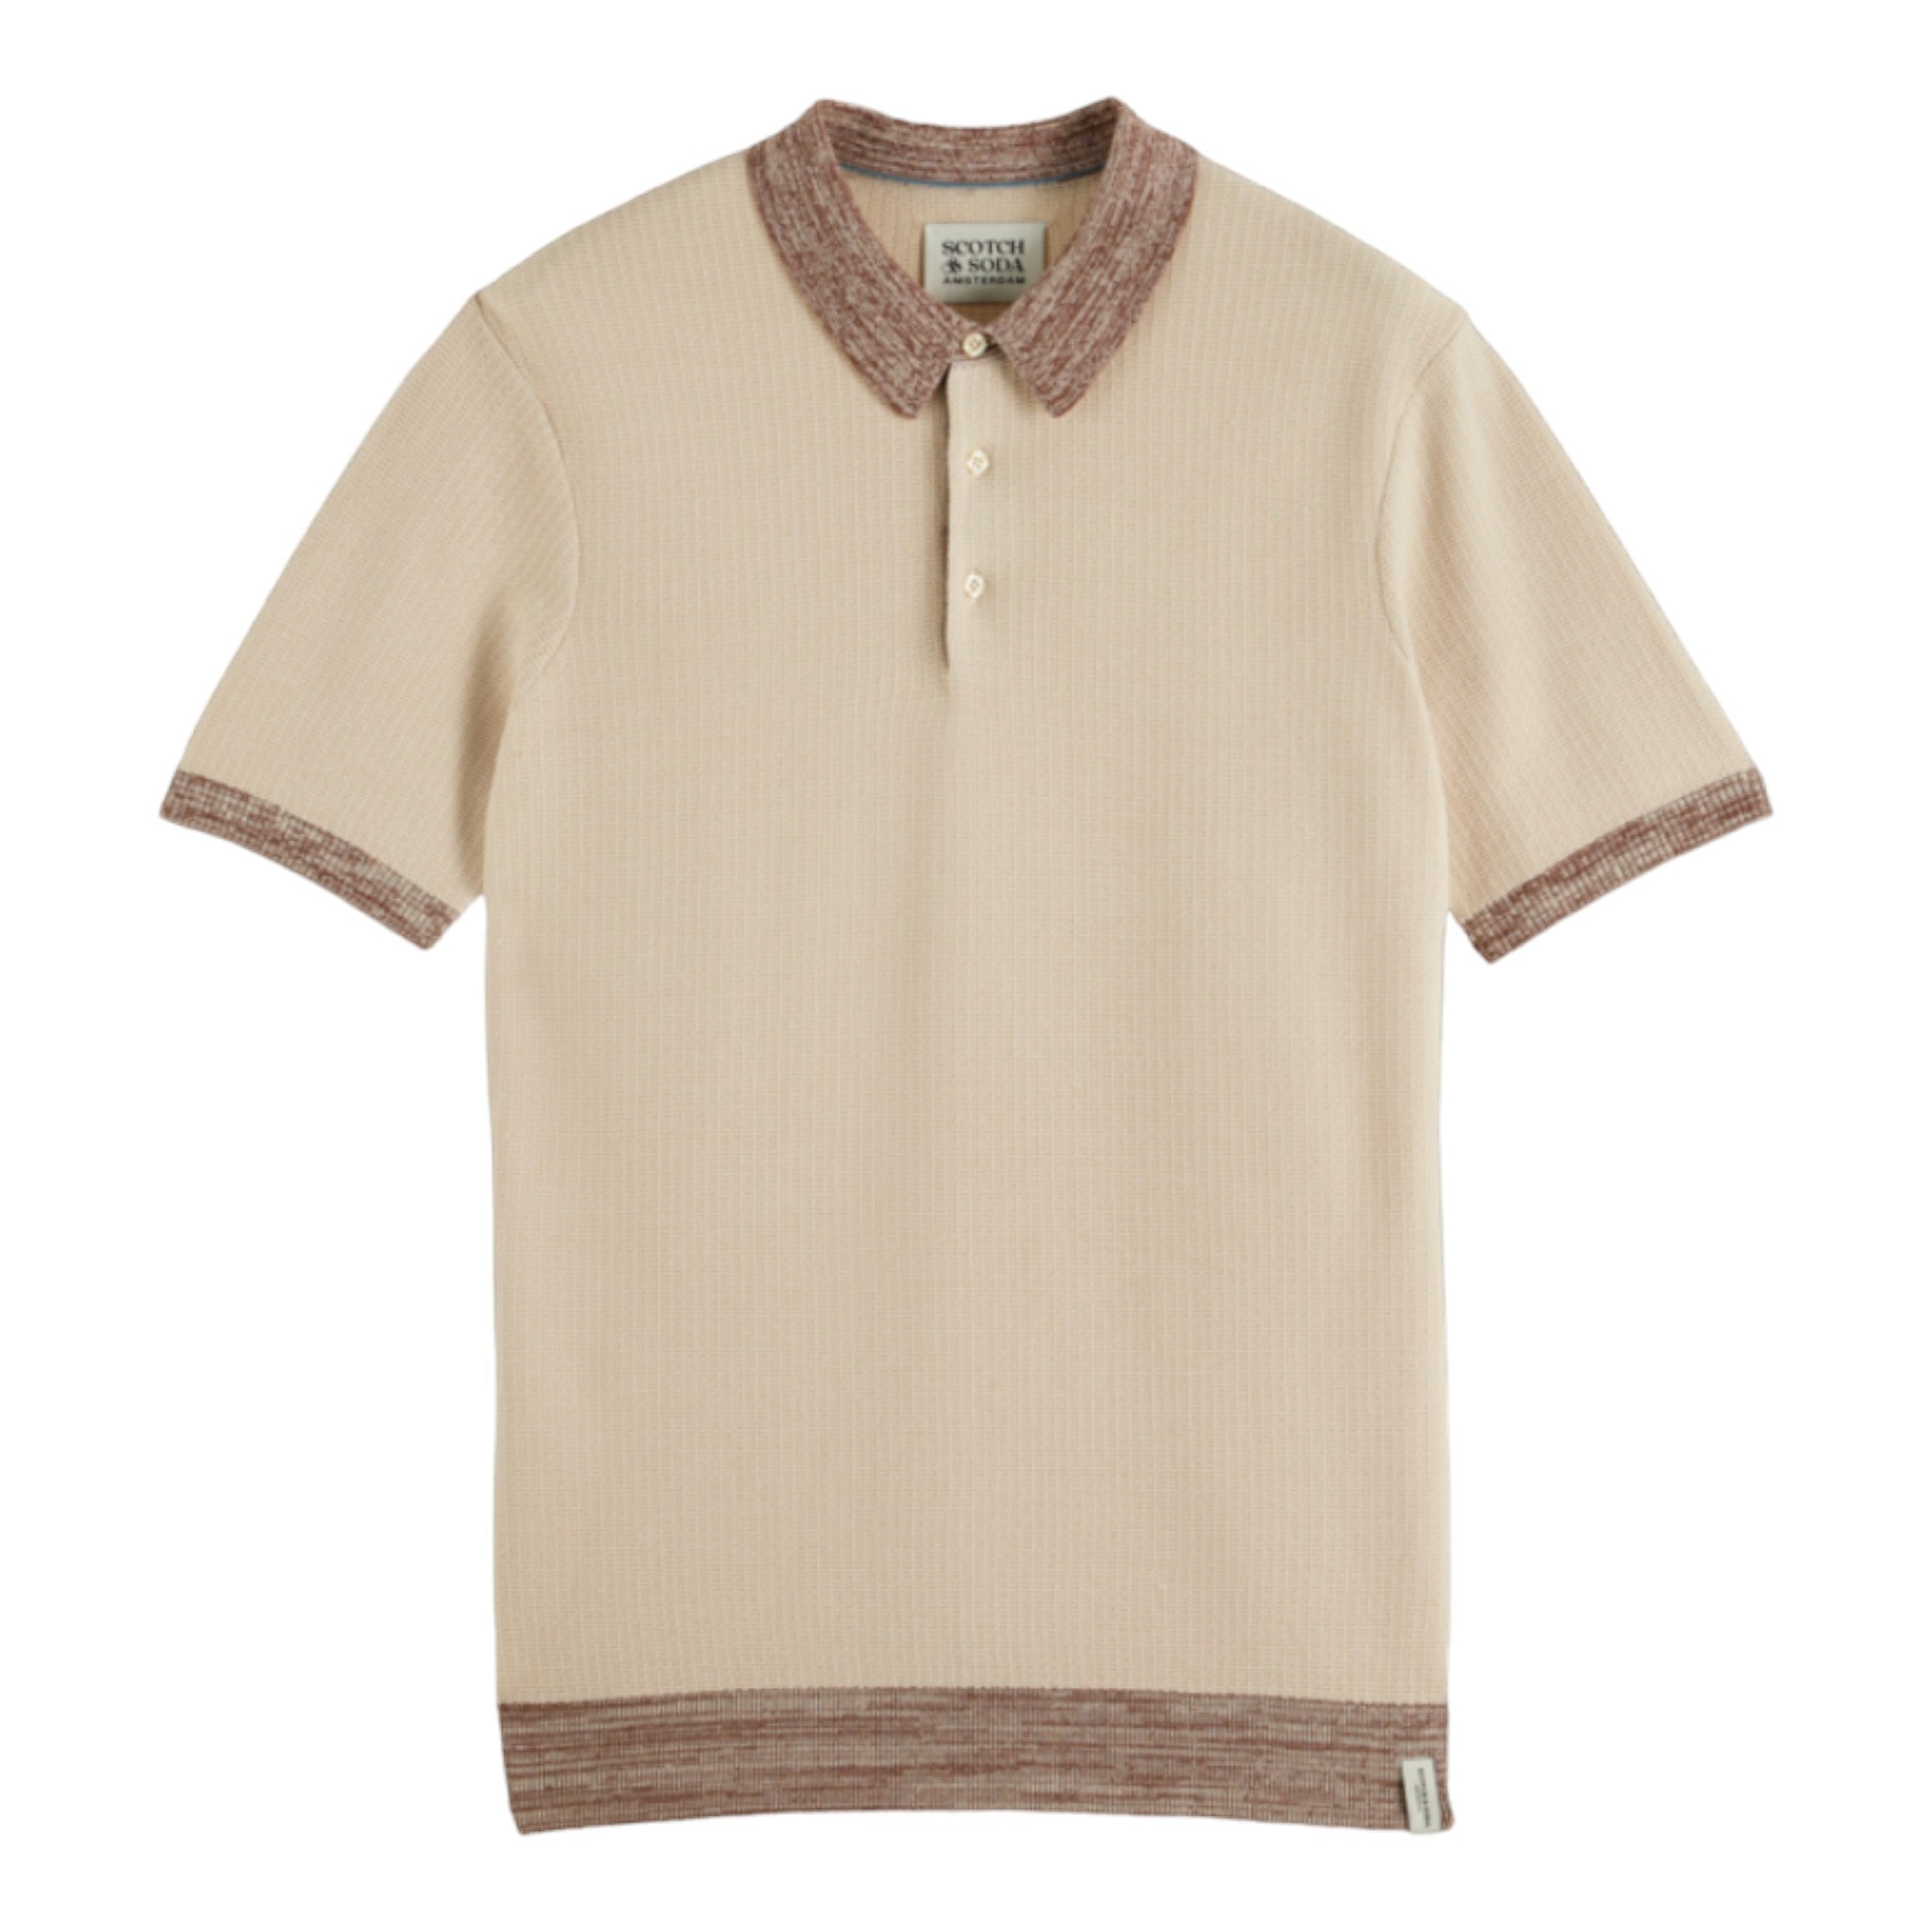 Tan knitted polo